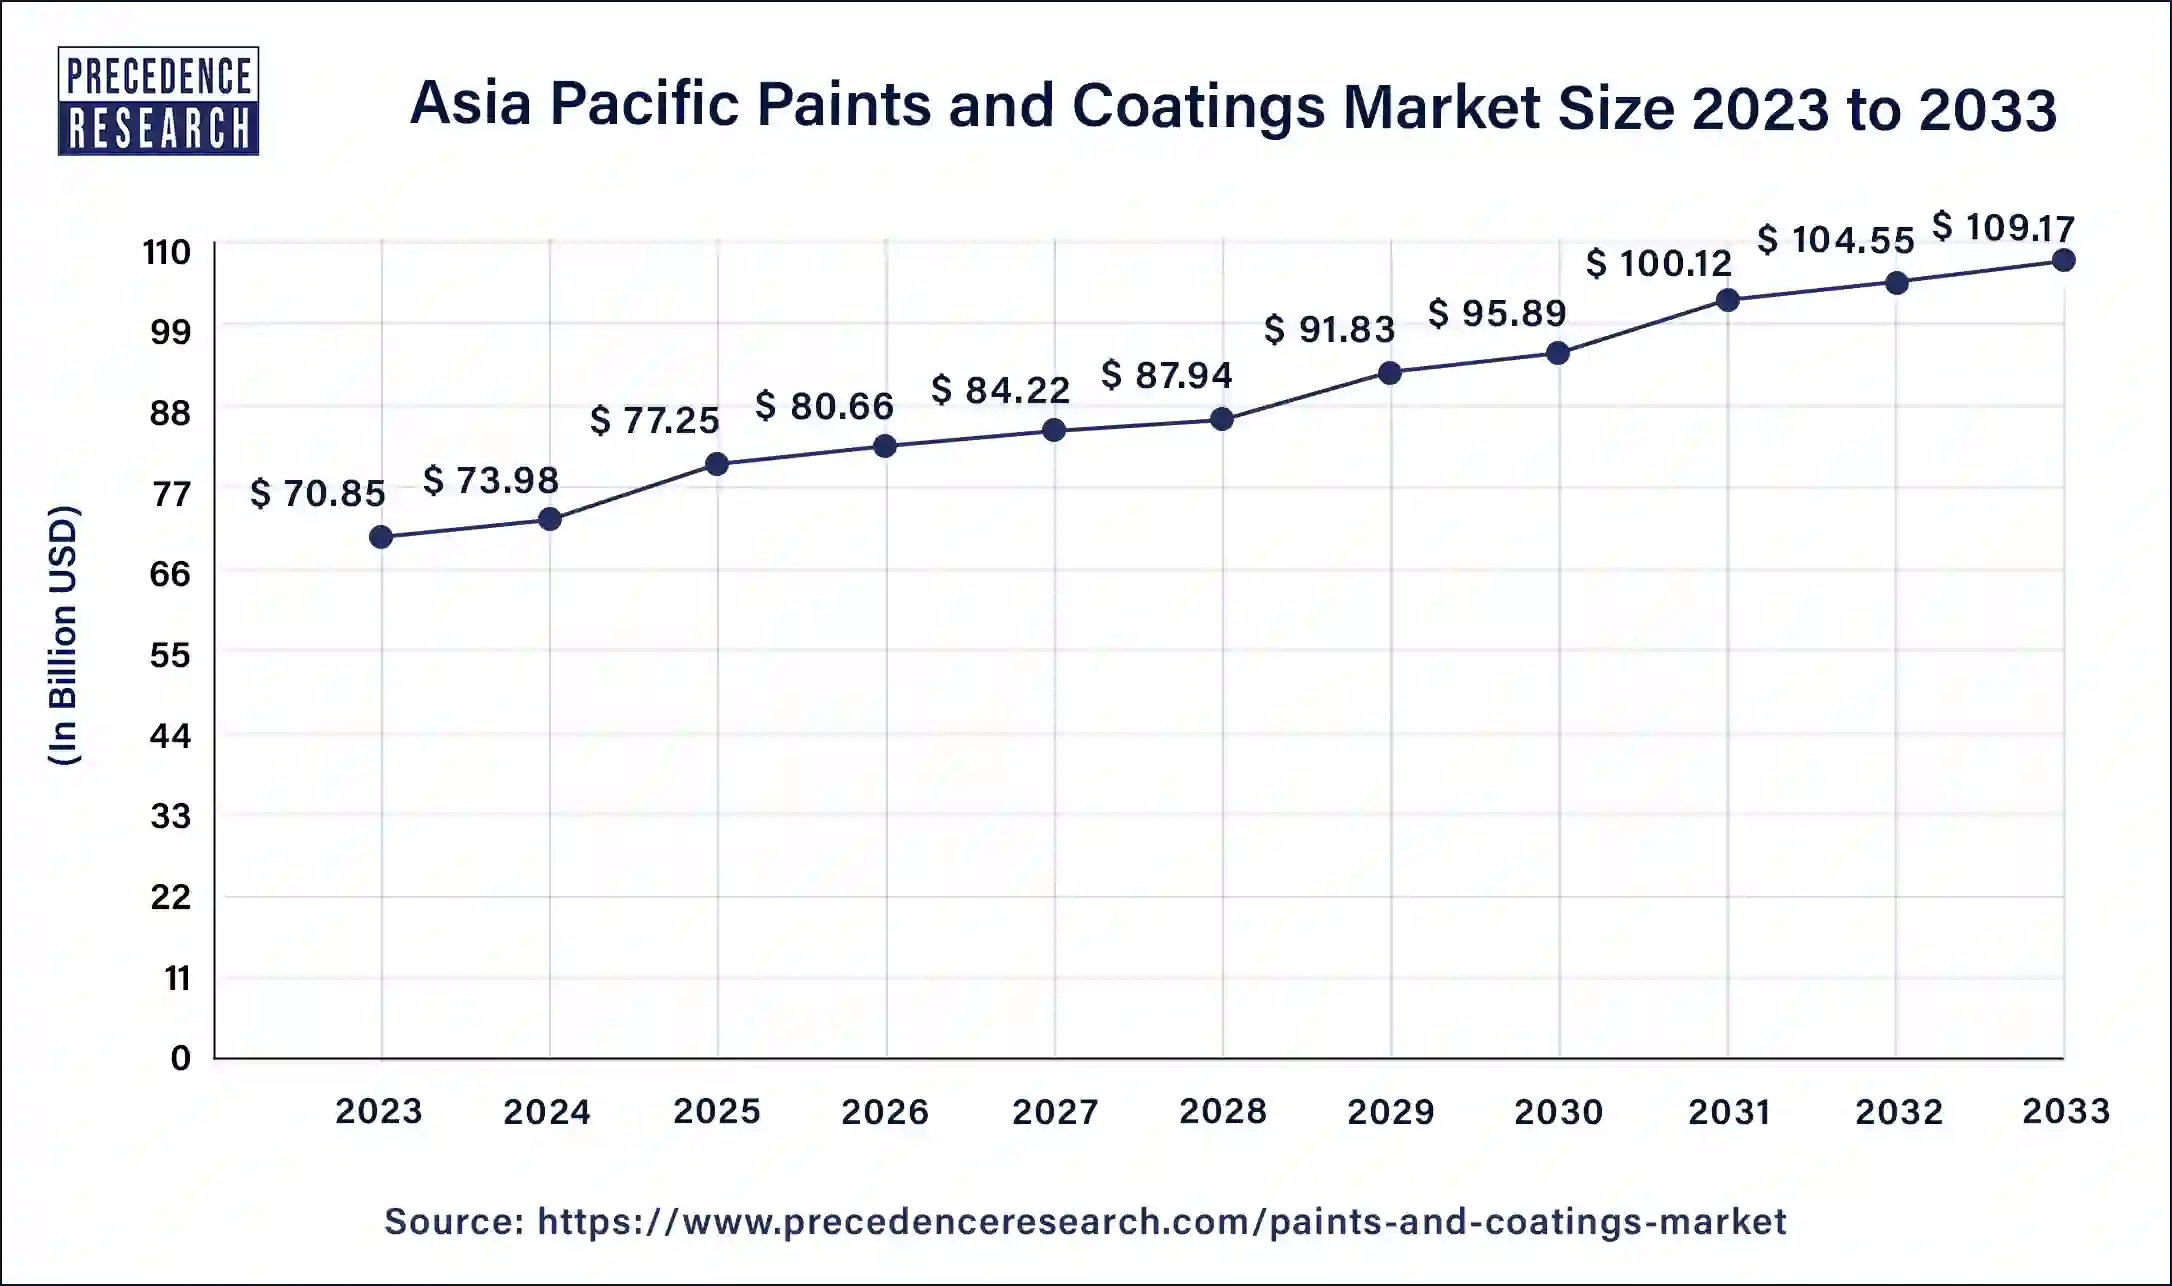 Asia Pacific Paints and Coatings Market Size 2024 to 2033